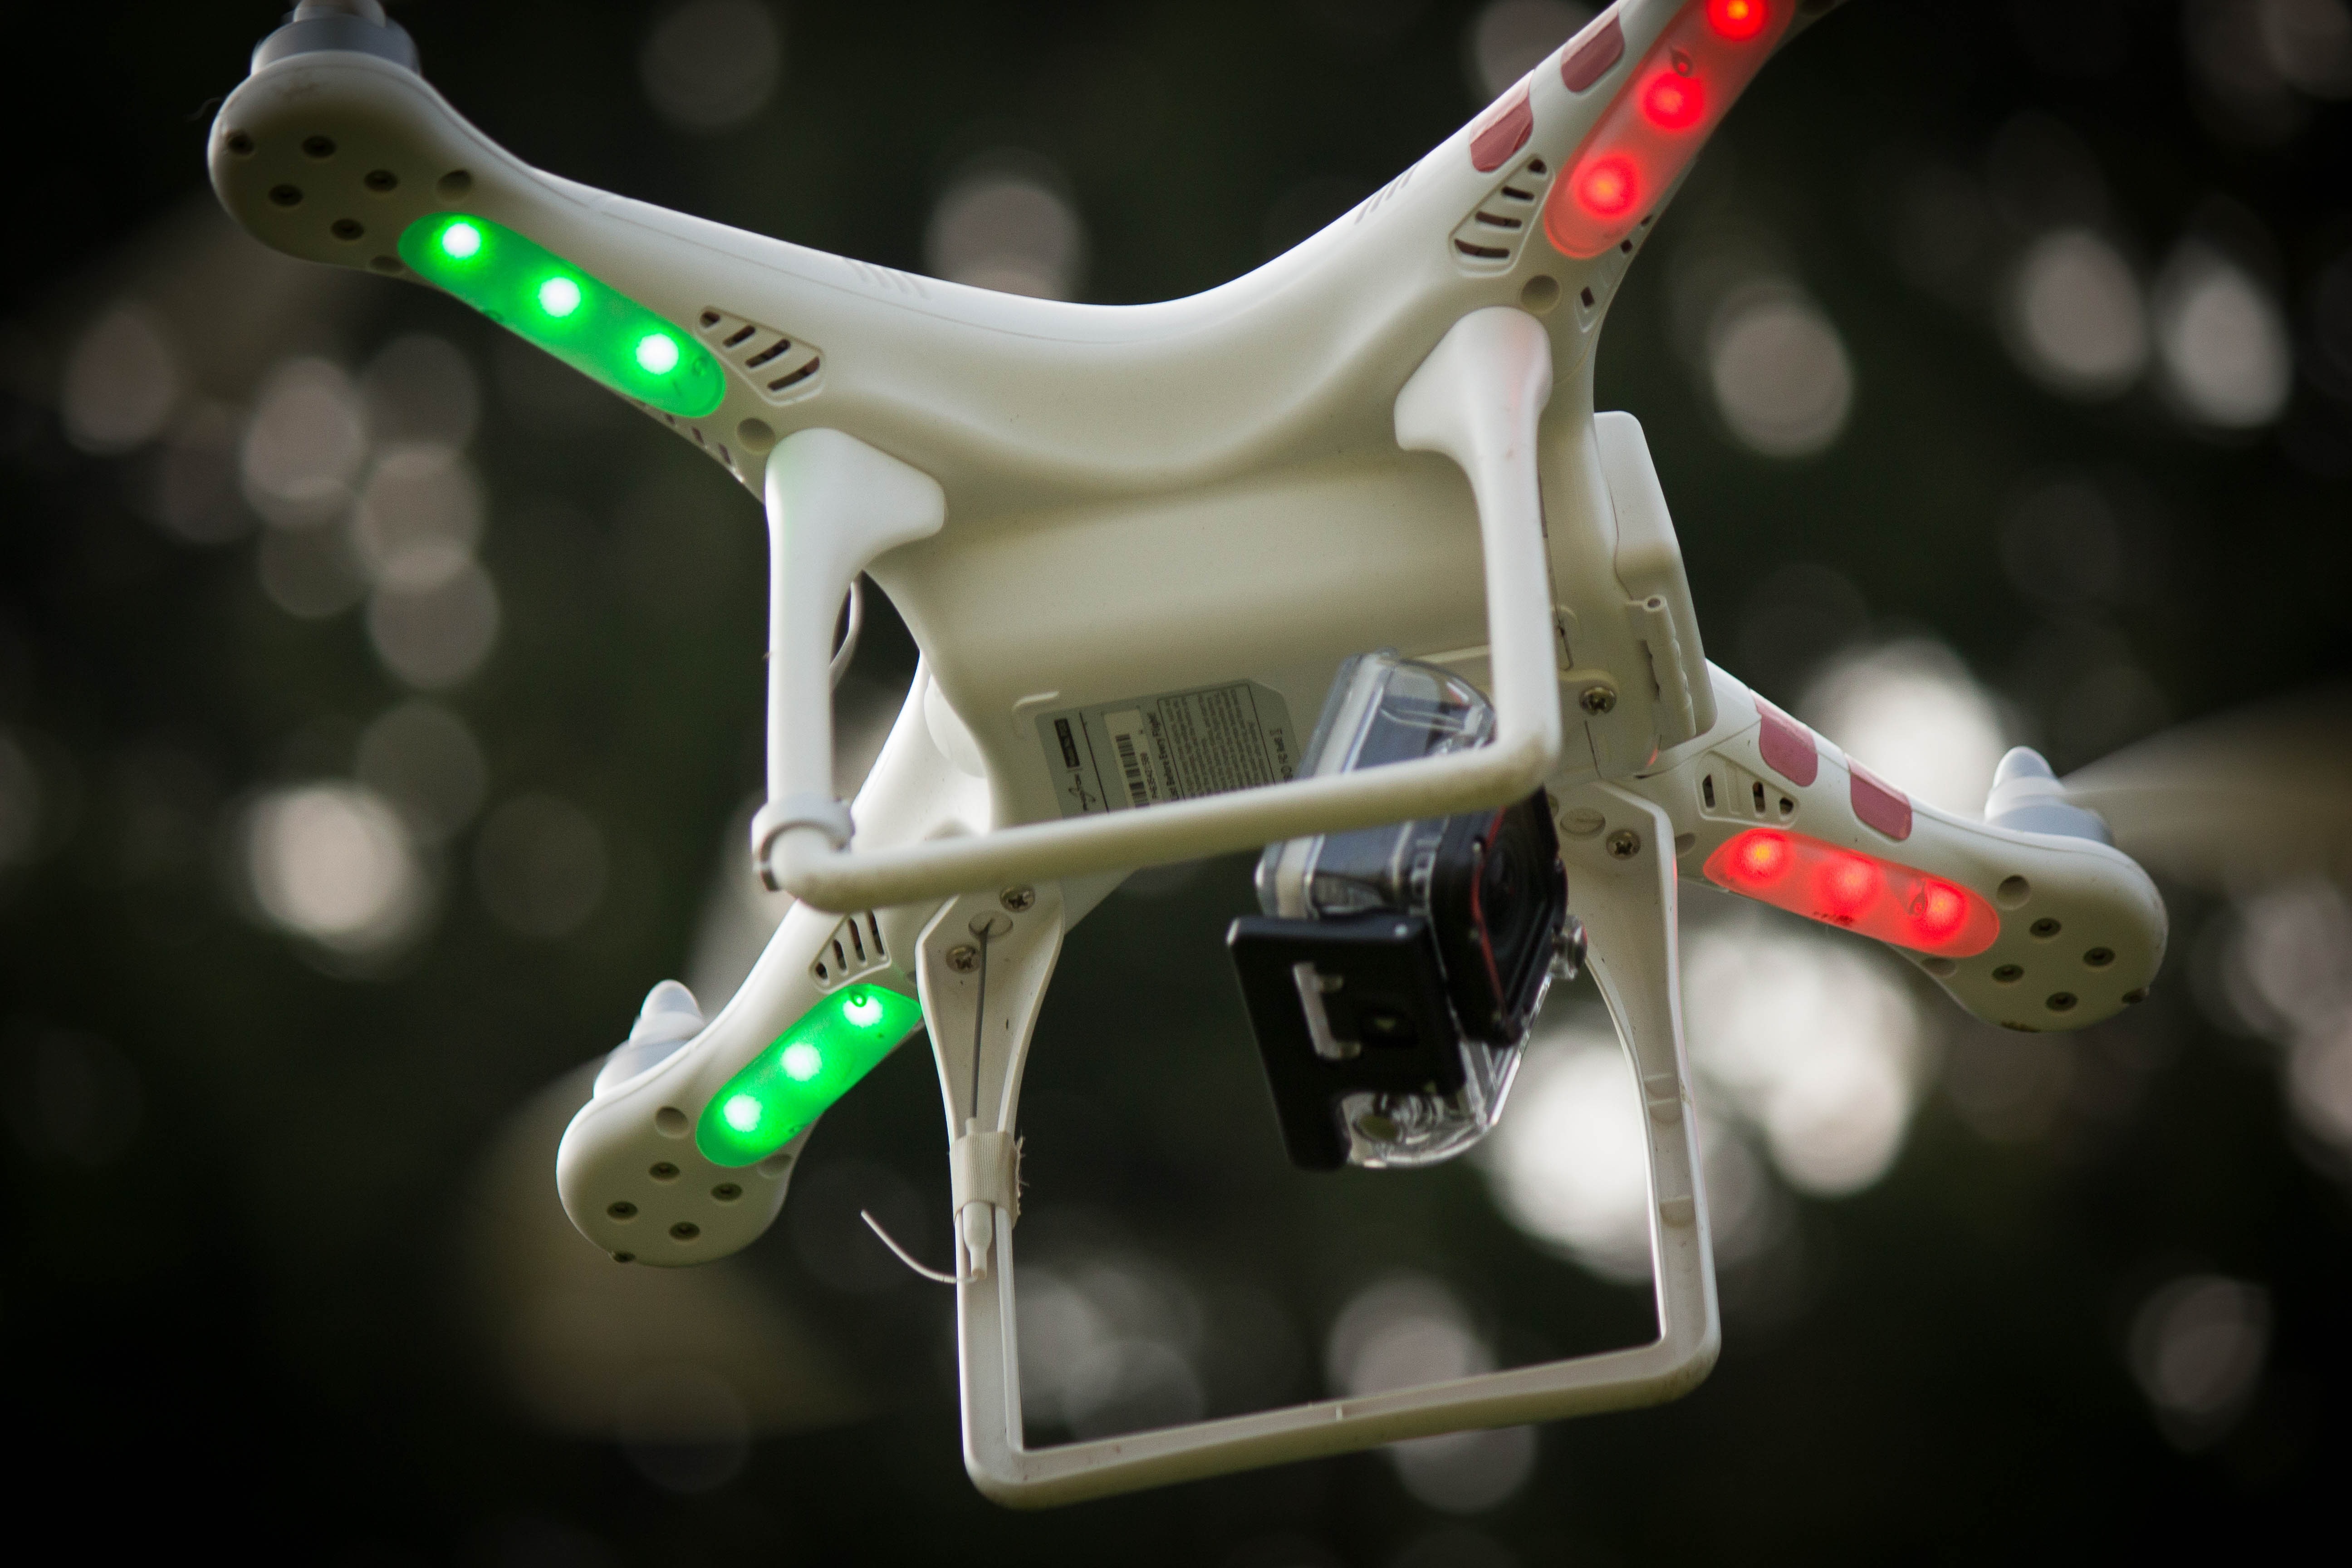 white and red quadcopter drone camera